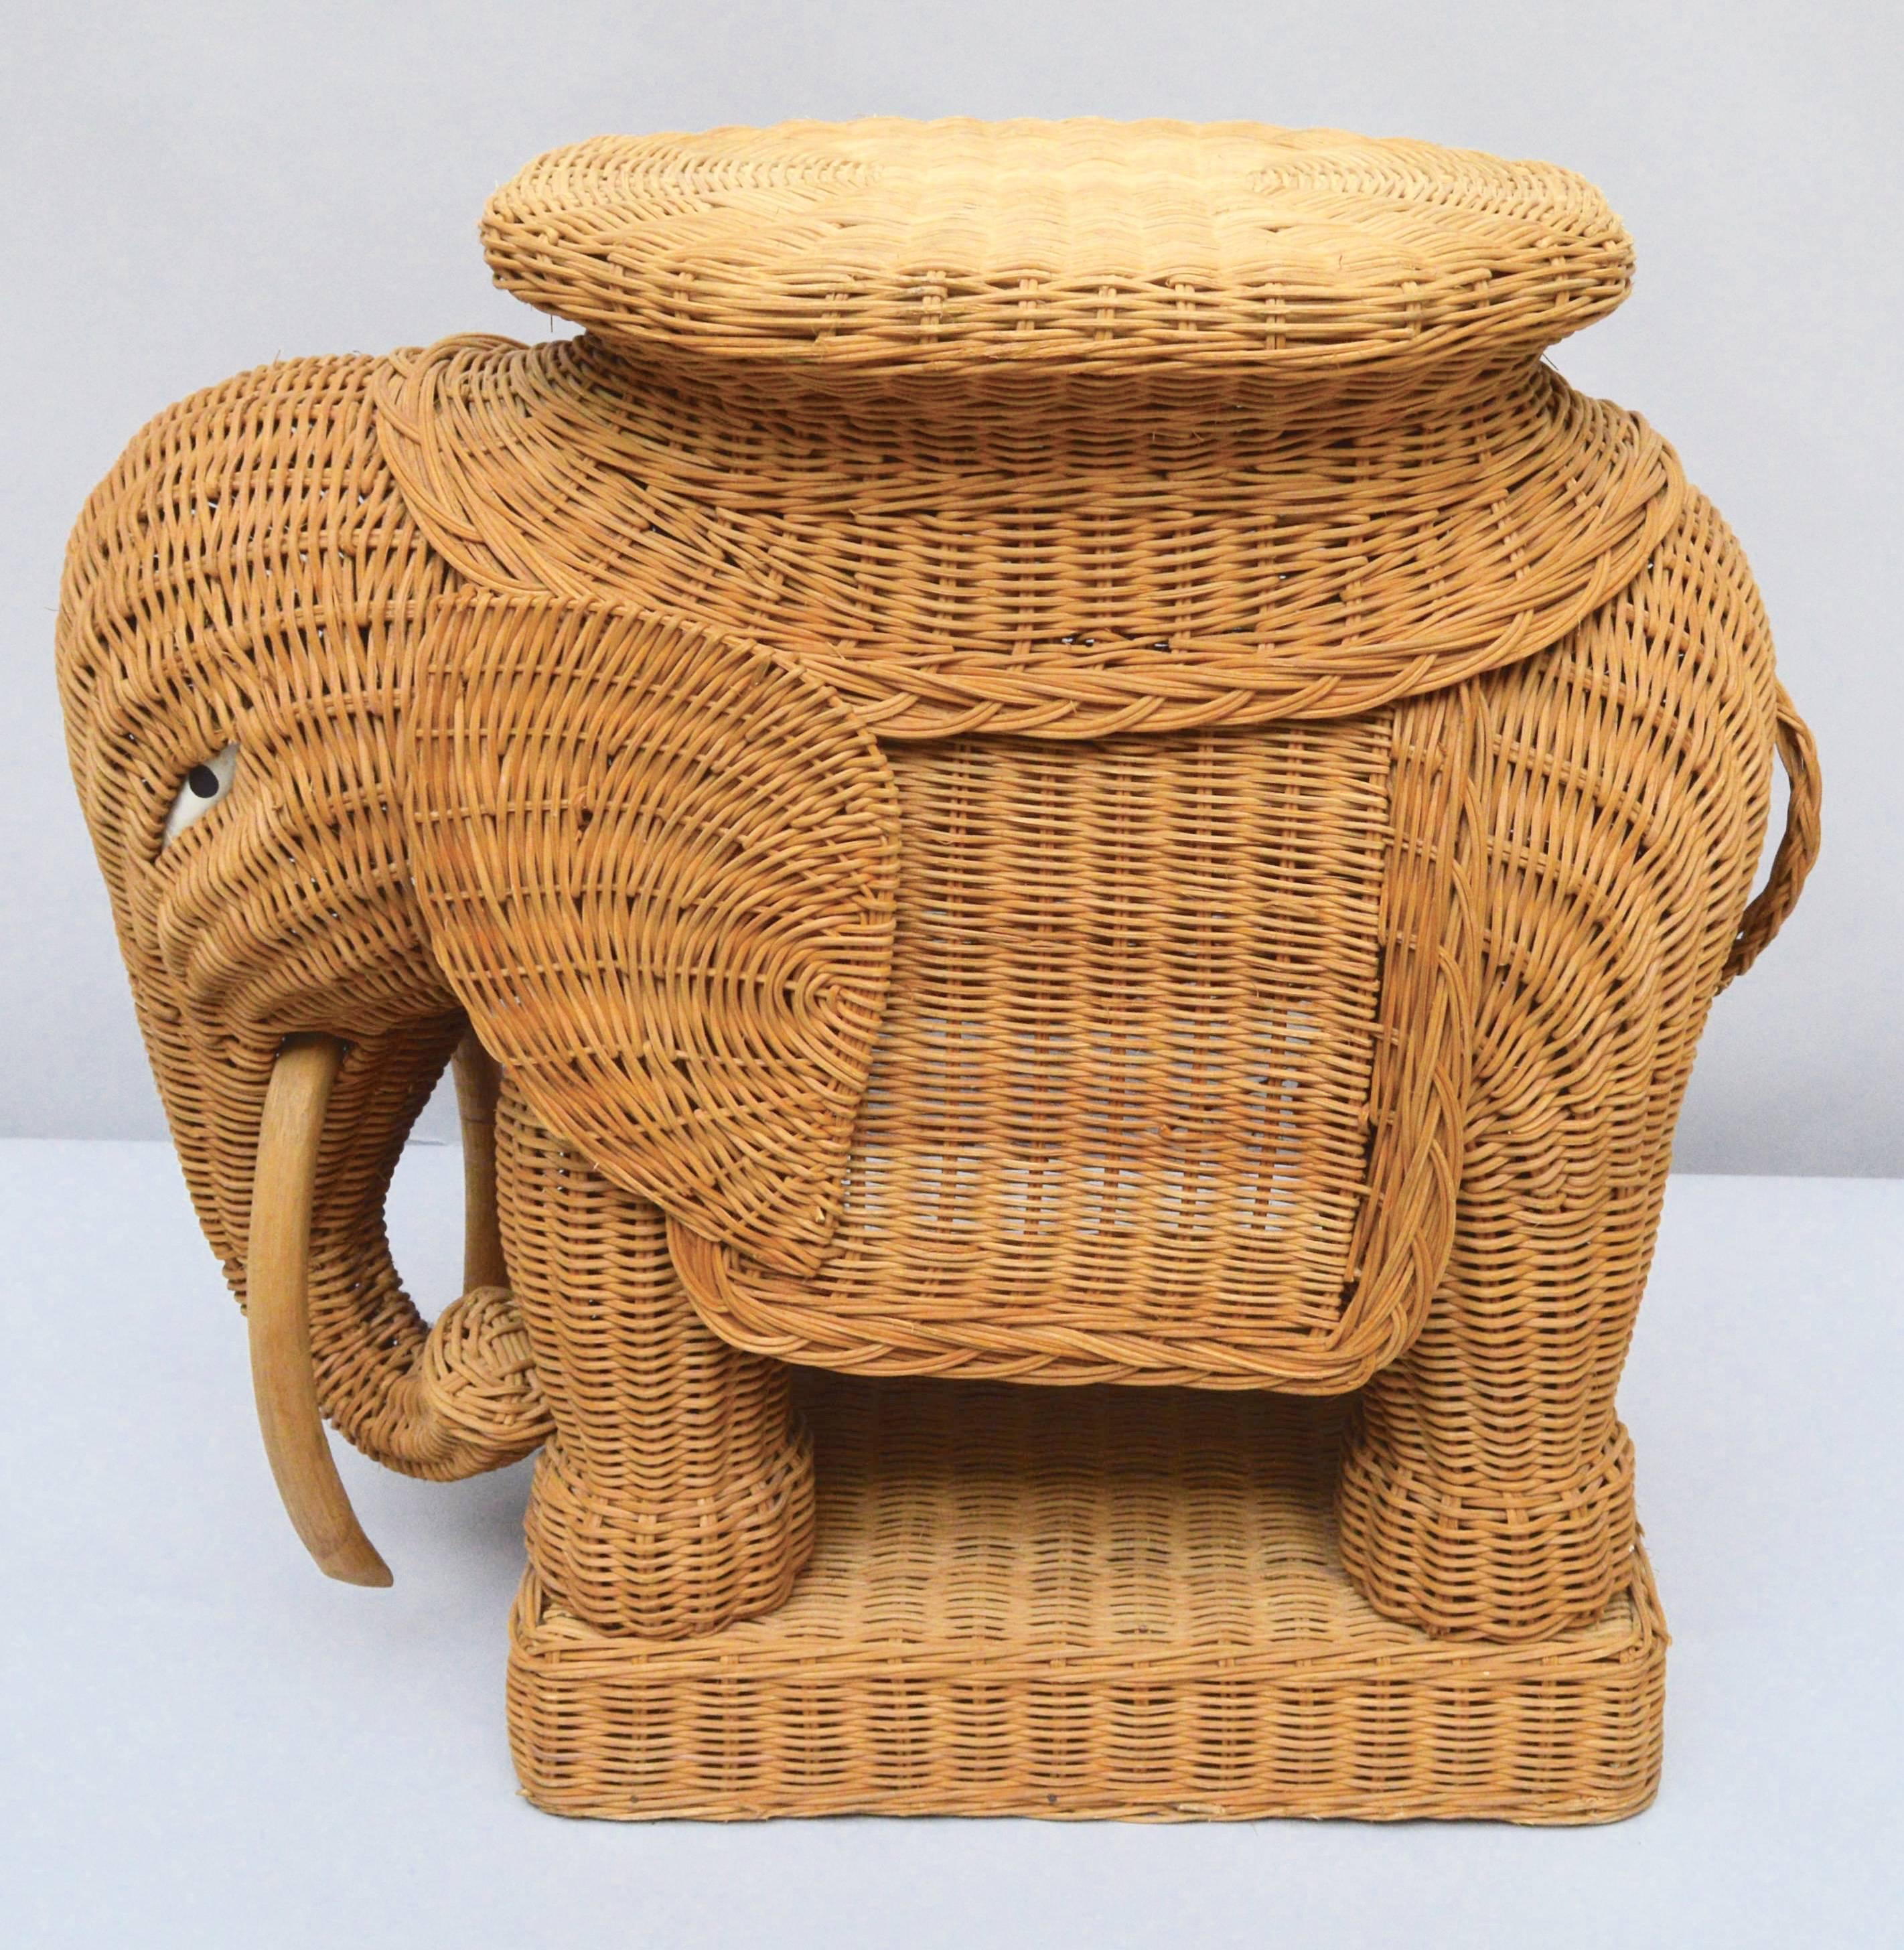 1970s woven wicker elephant made in Italy to be used as either a side table or stool. The tusks are bent bamboo and the eyes are painted wood. A fun addition to any decor.